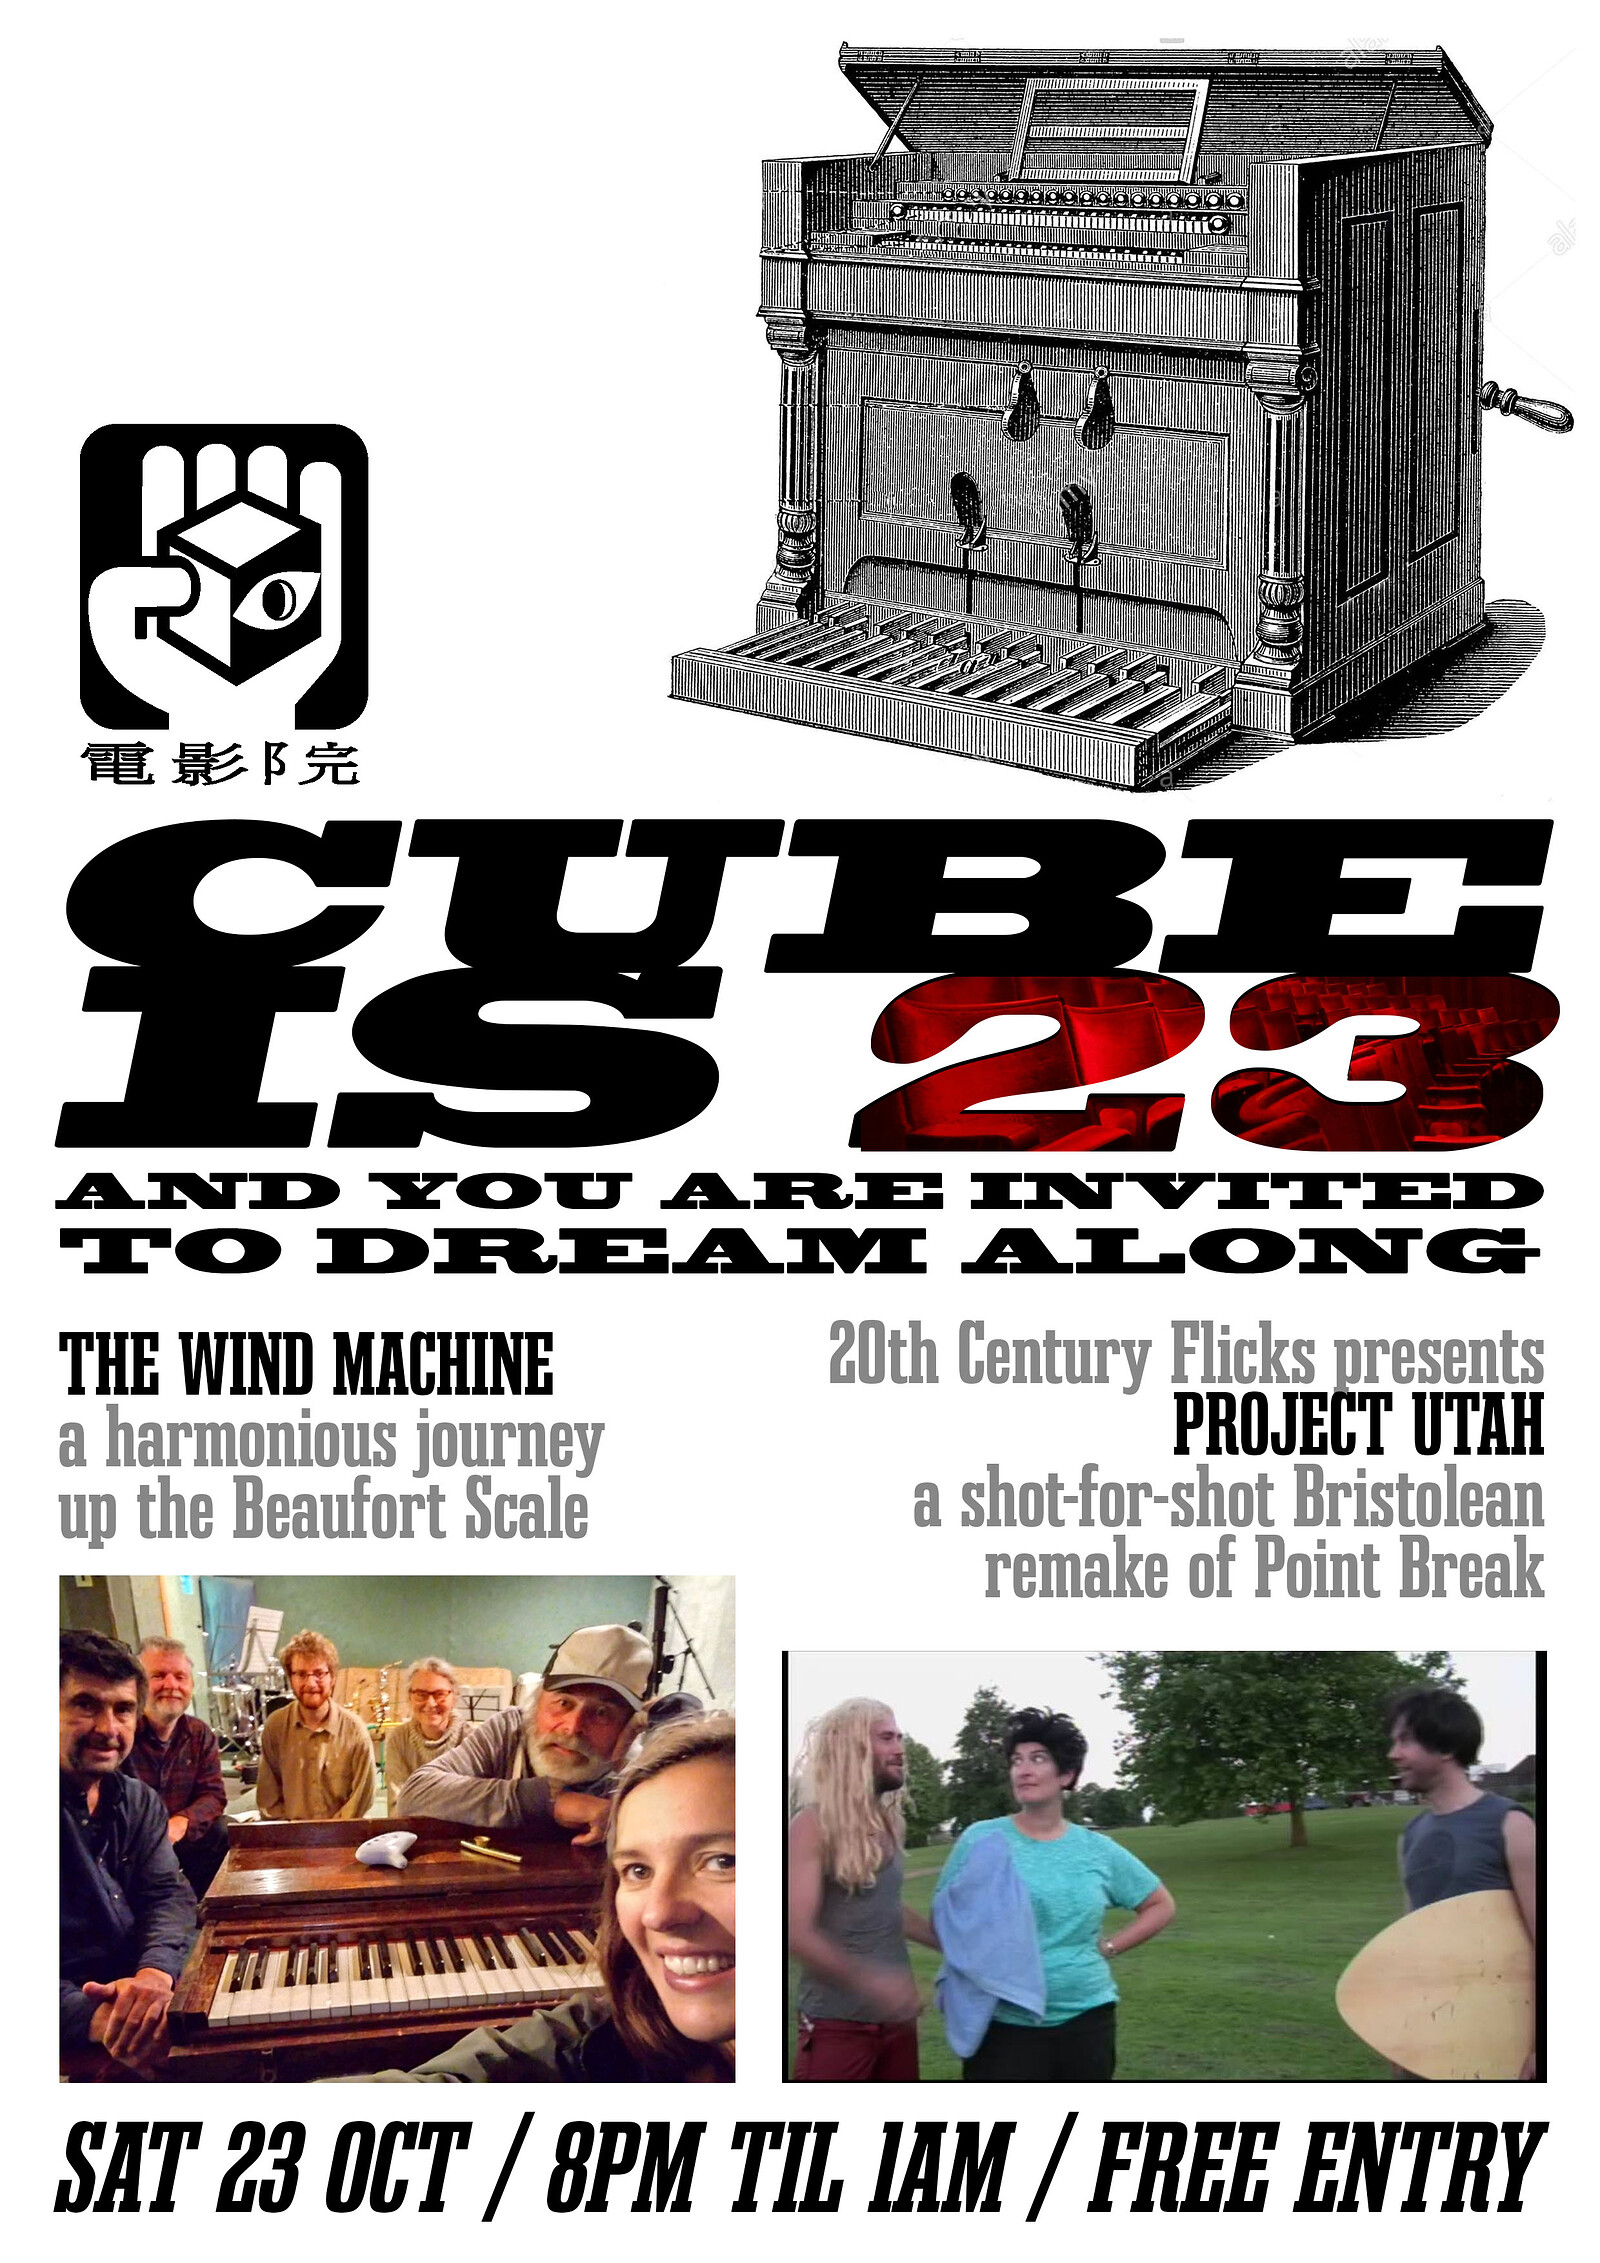 CUBE IS 23: THE WIND MACHINE + PROJECT UTAH at The Cube